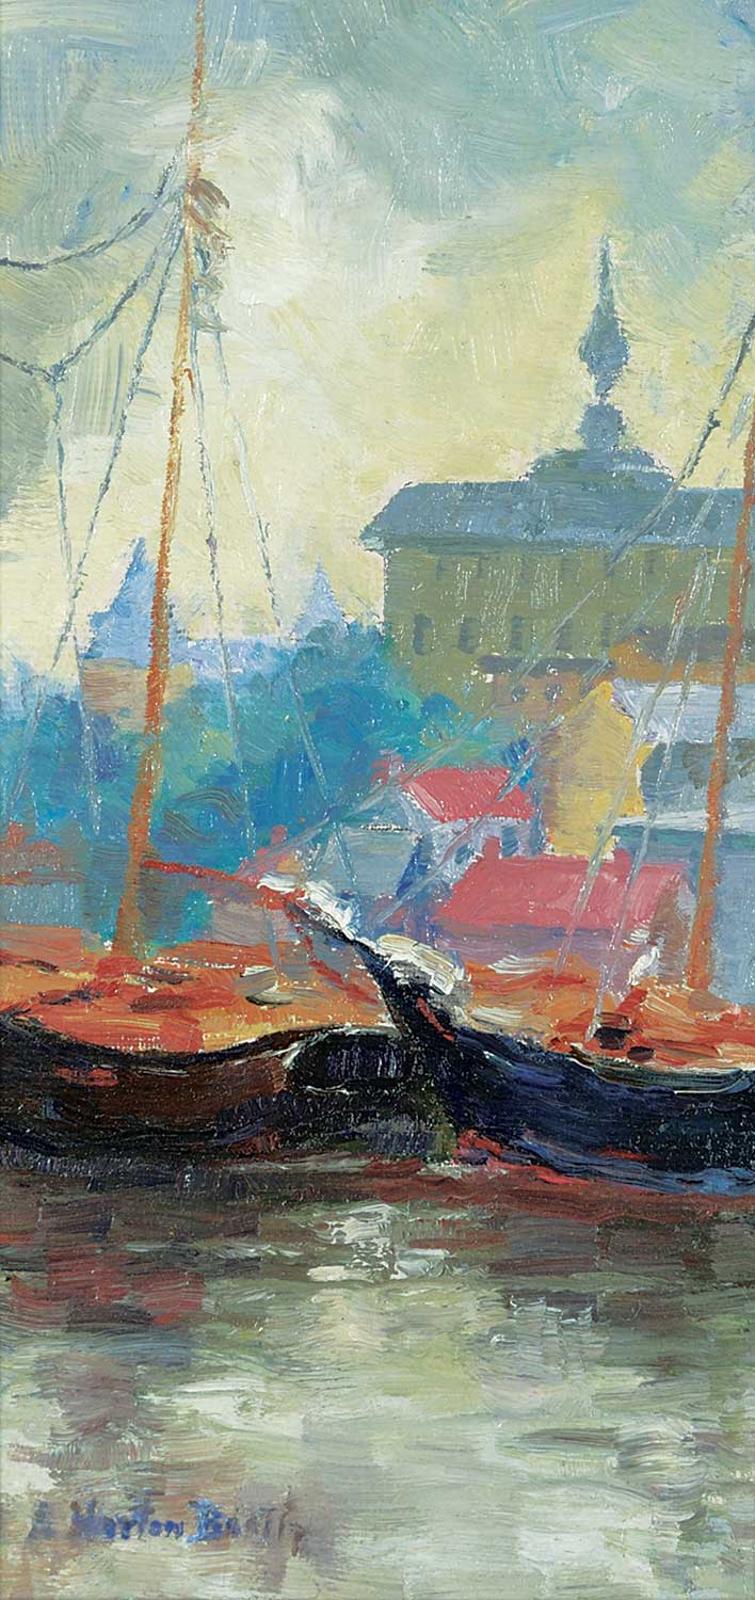 A. Norton Beatty - Ships in a Port